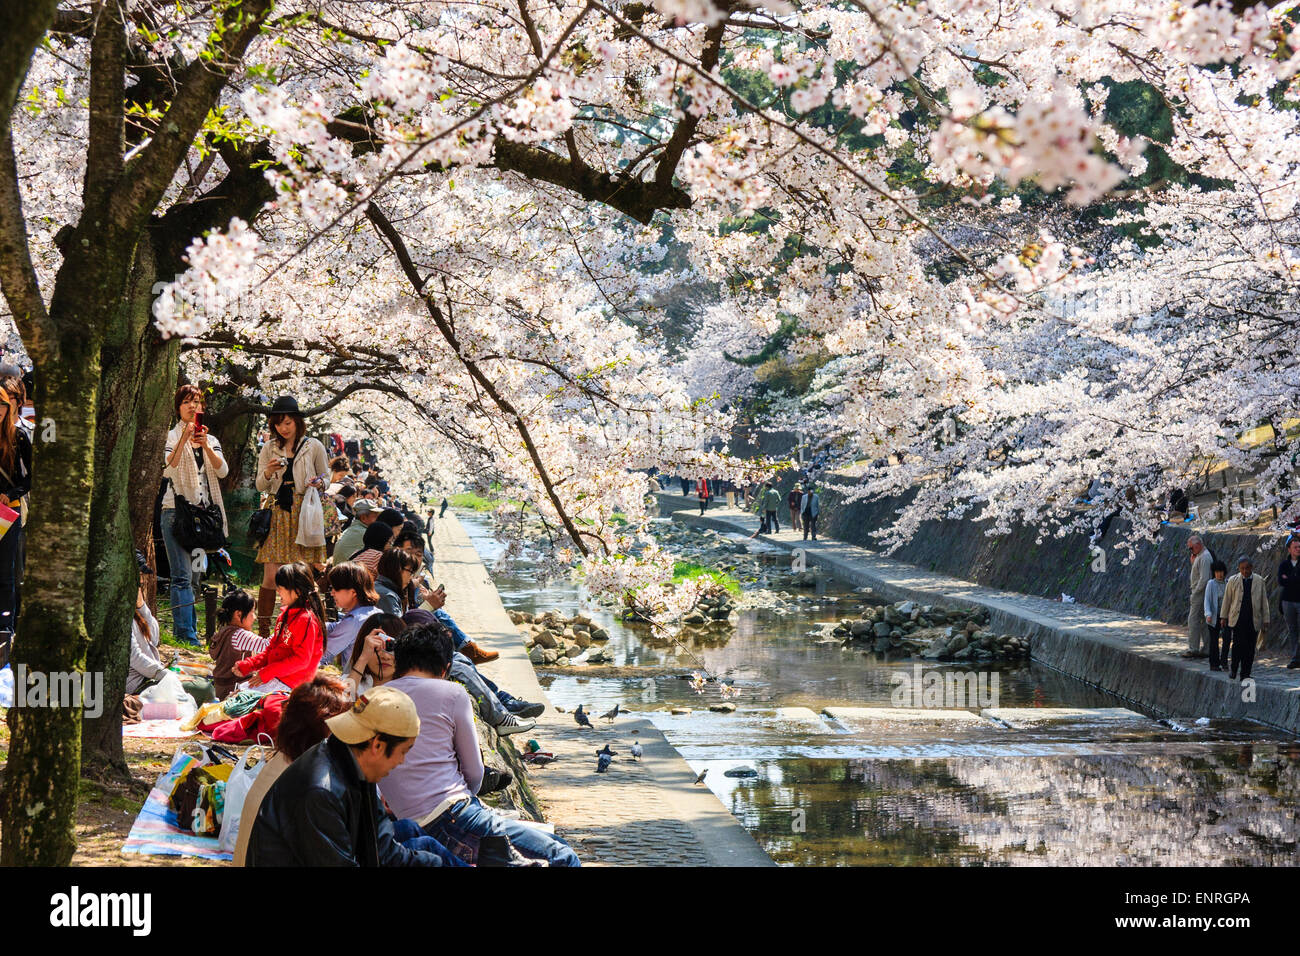 Crowded springtime scene of people walking under rows of cherry blossom tress while others sitting in groups picnicking by the Shukugawa river, Japan. Stock Photo